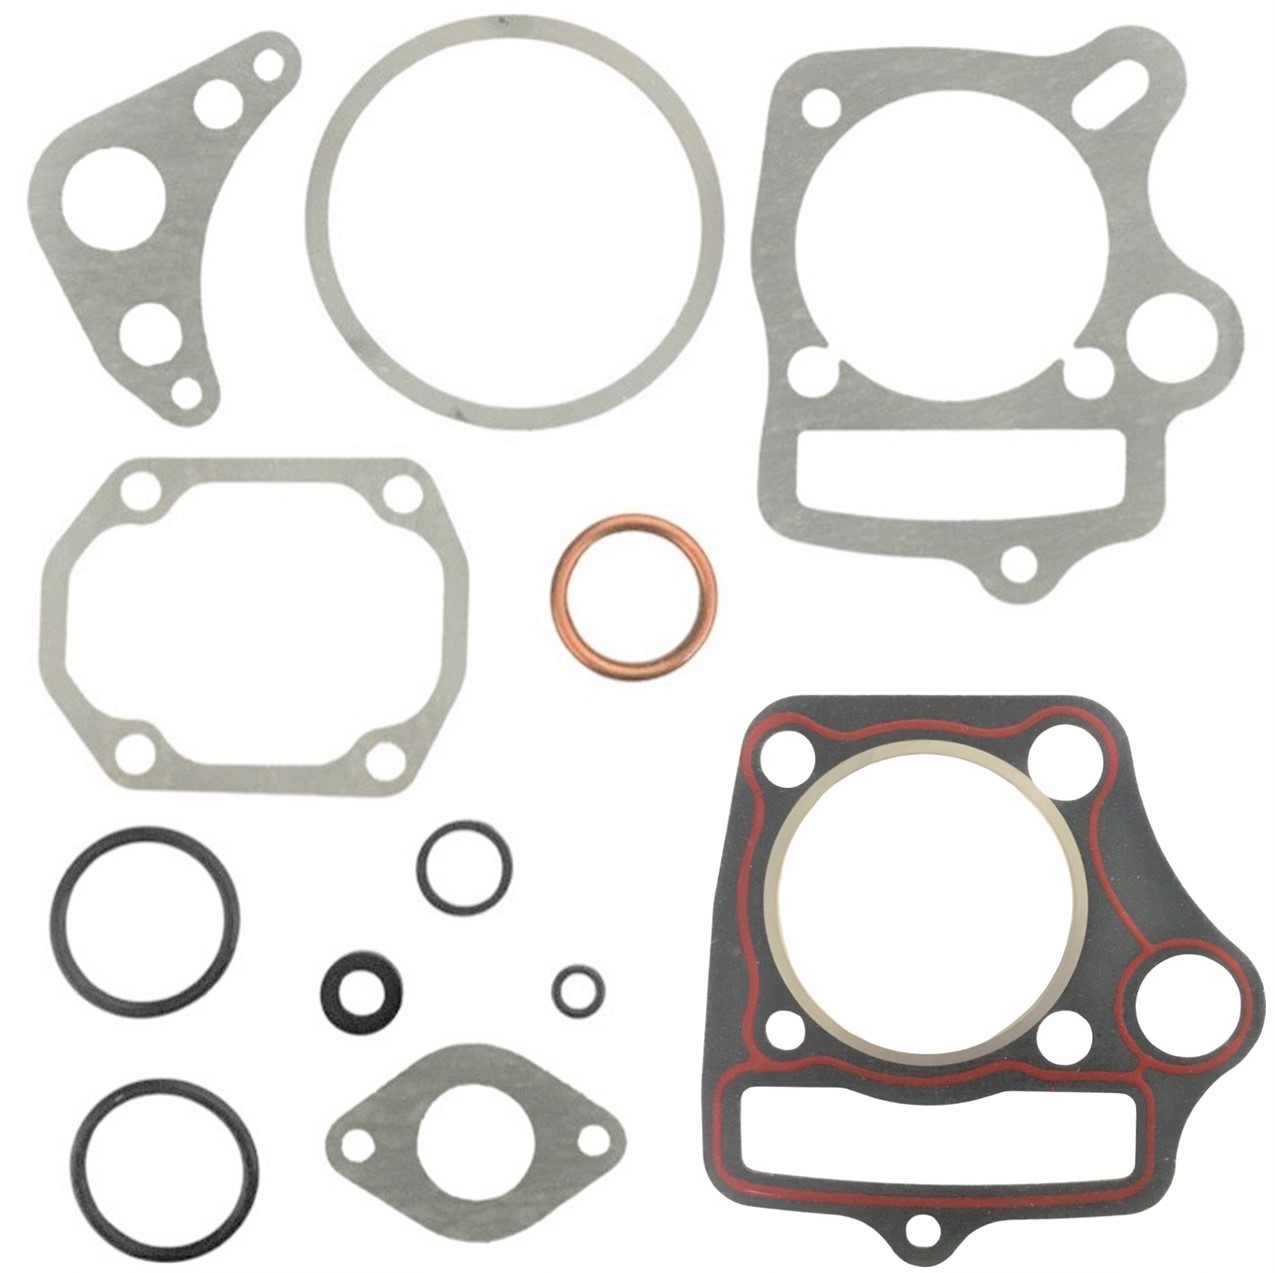 Top End Gasket Set 125cc 54mm Fits ATVs & DirtBikes with the 125 Honda Copy Engine with 54mm Bore.